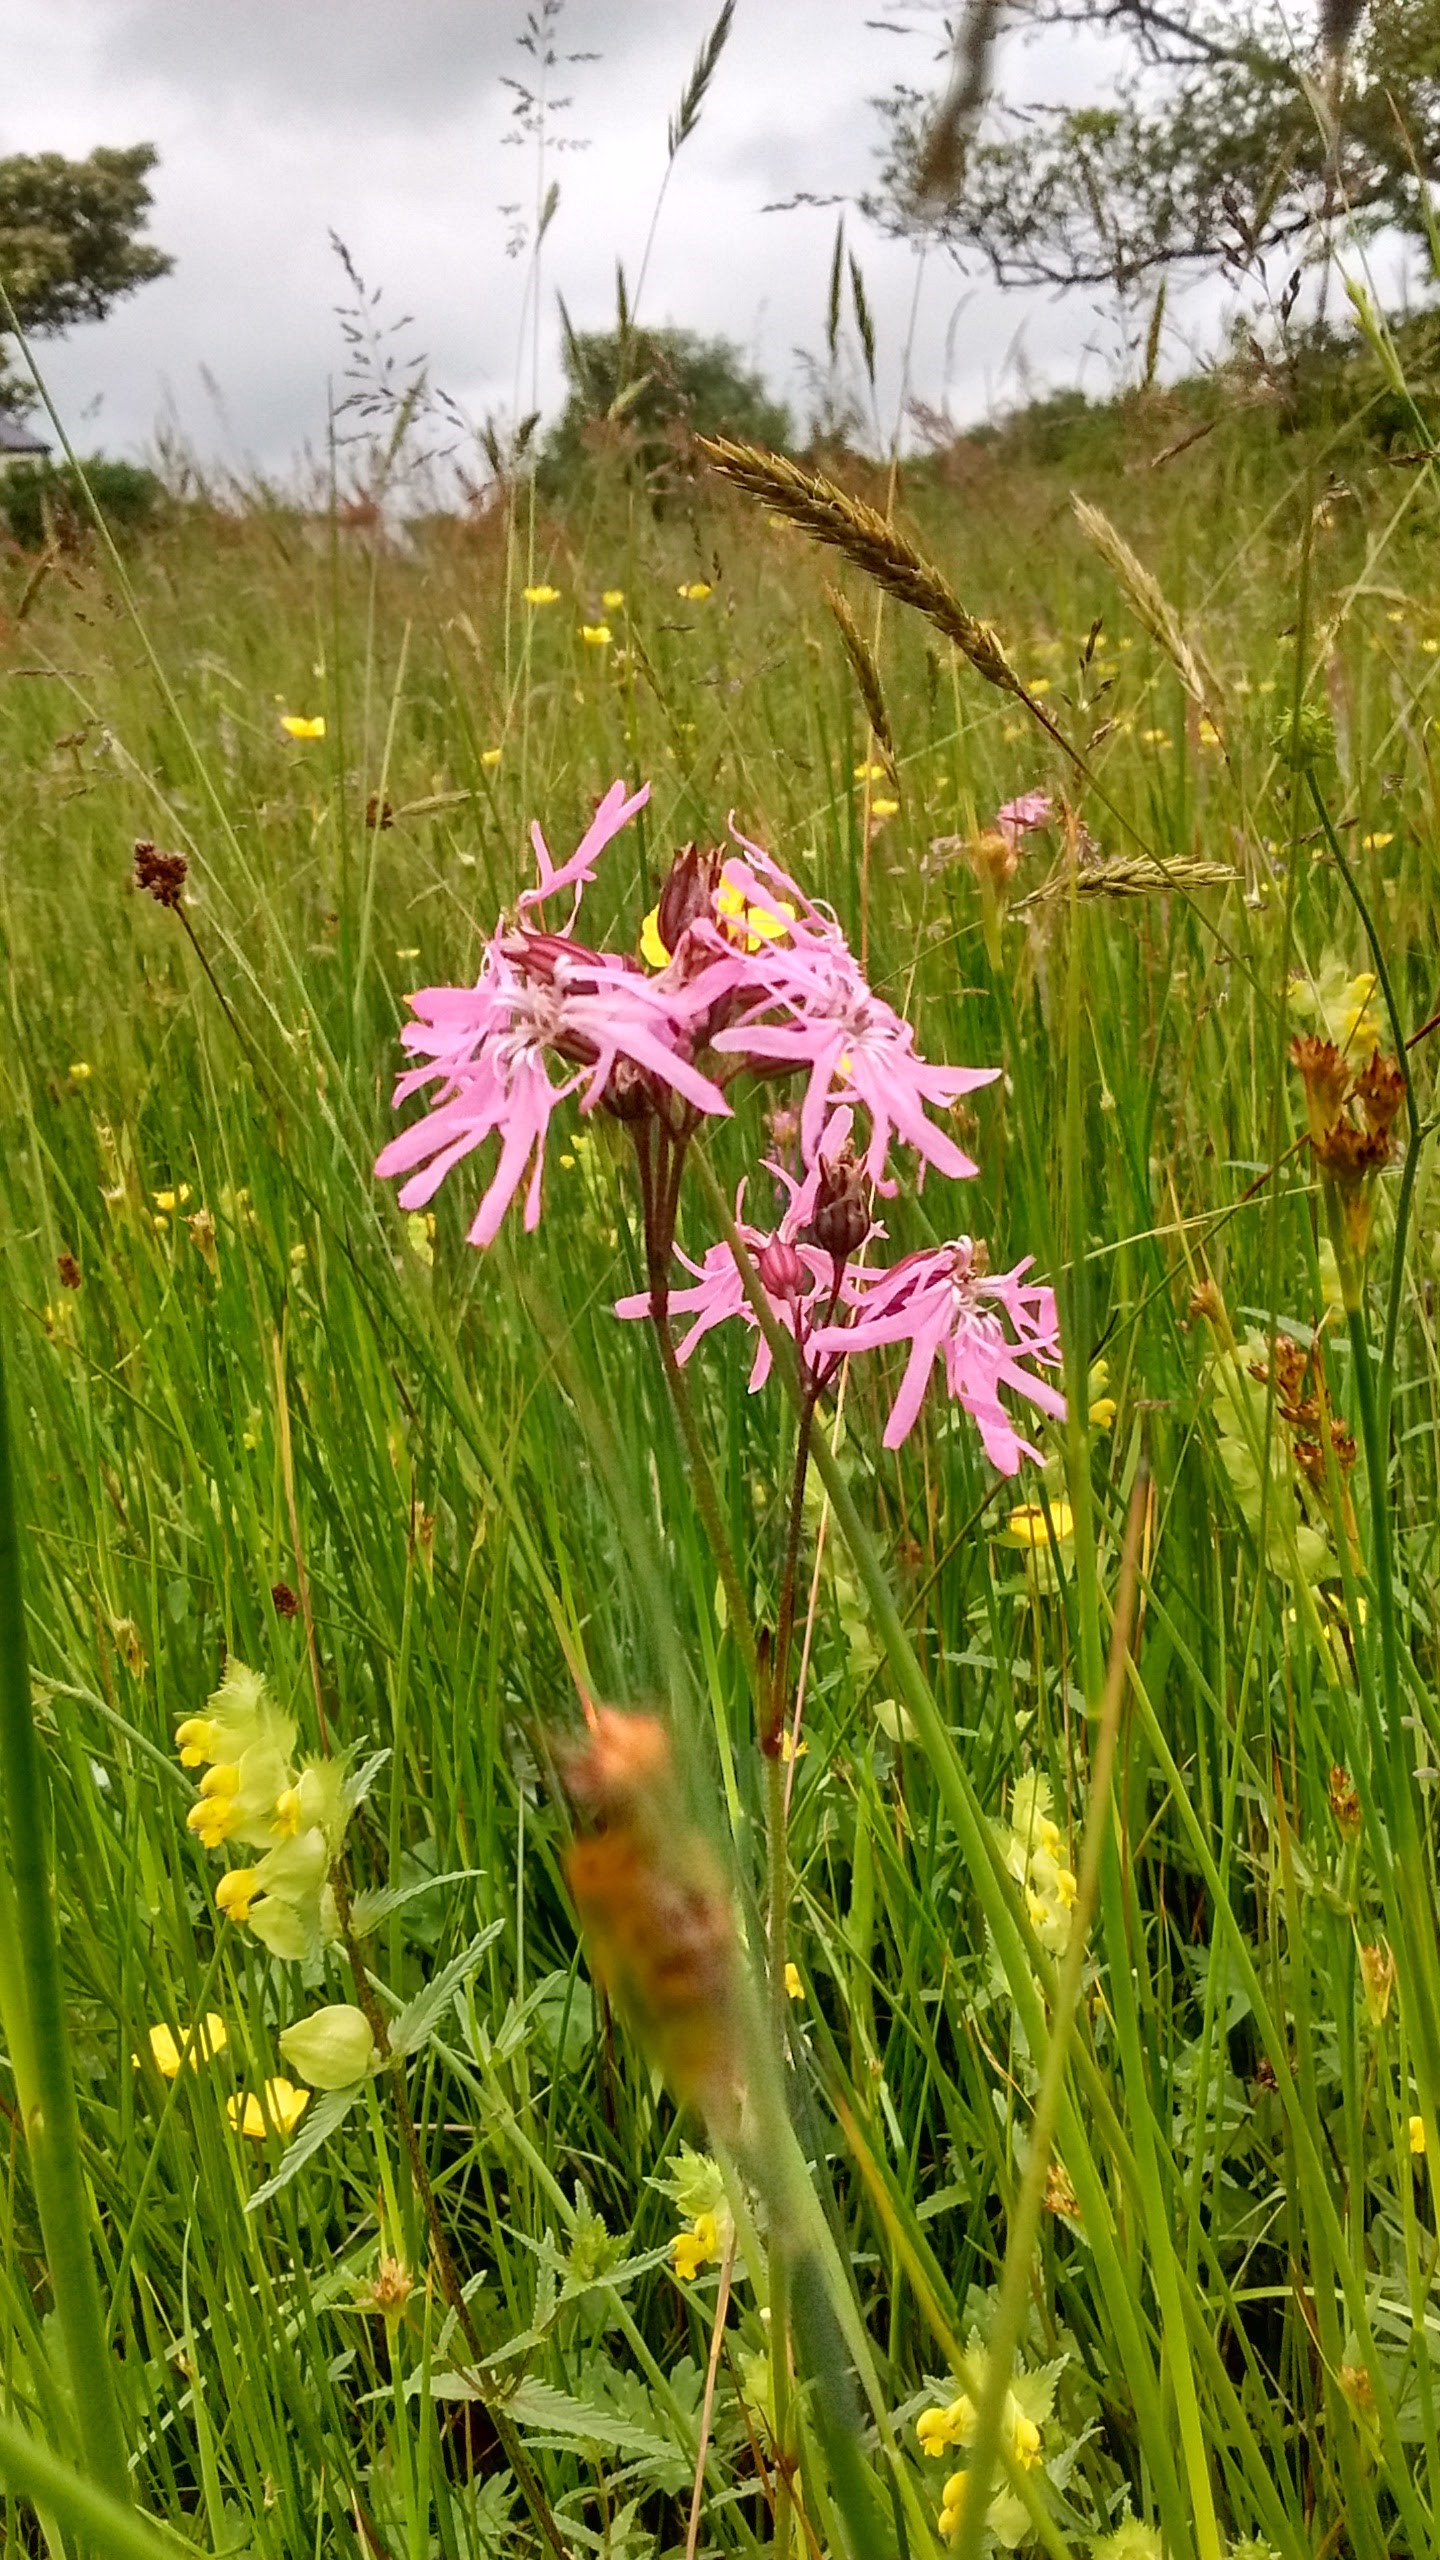 Ragged robin, yellow rattle, meadow buttercup and sweet vernal grass